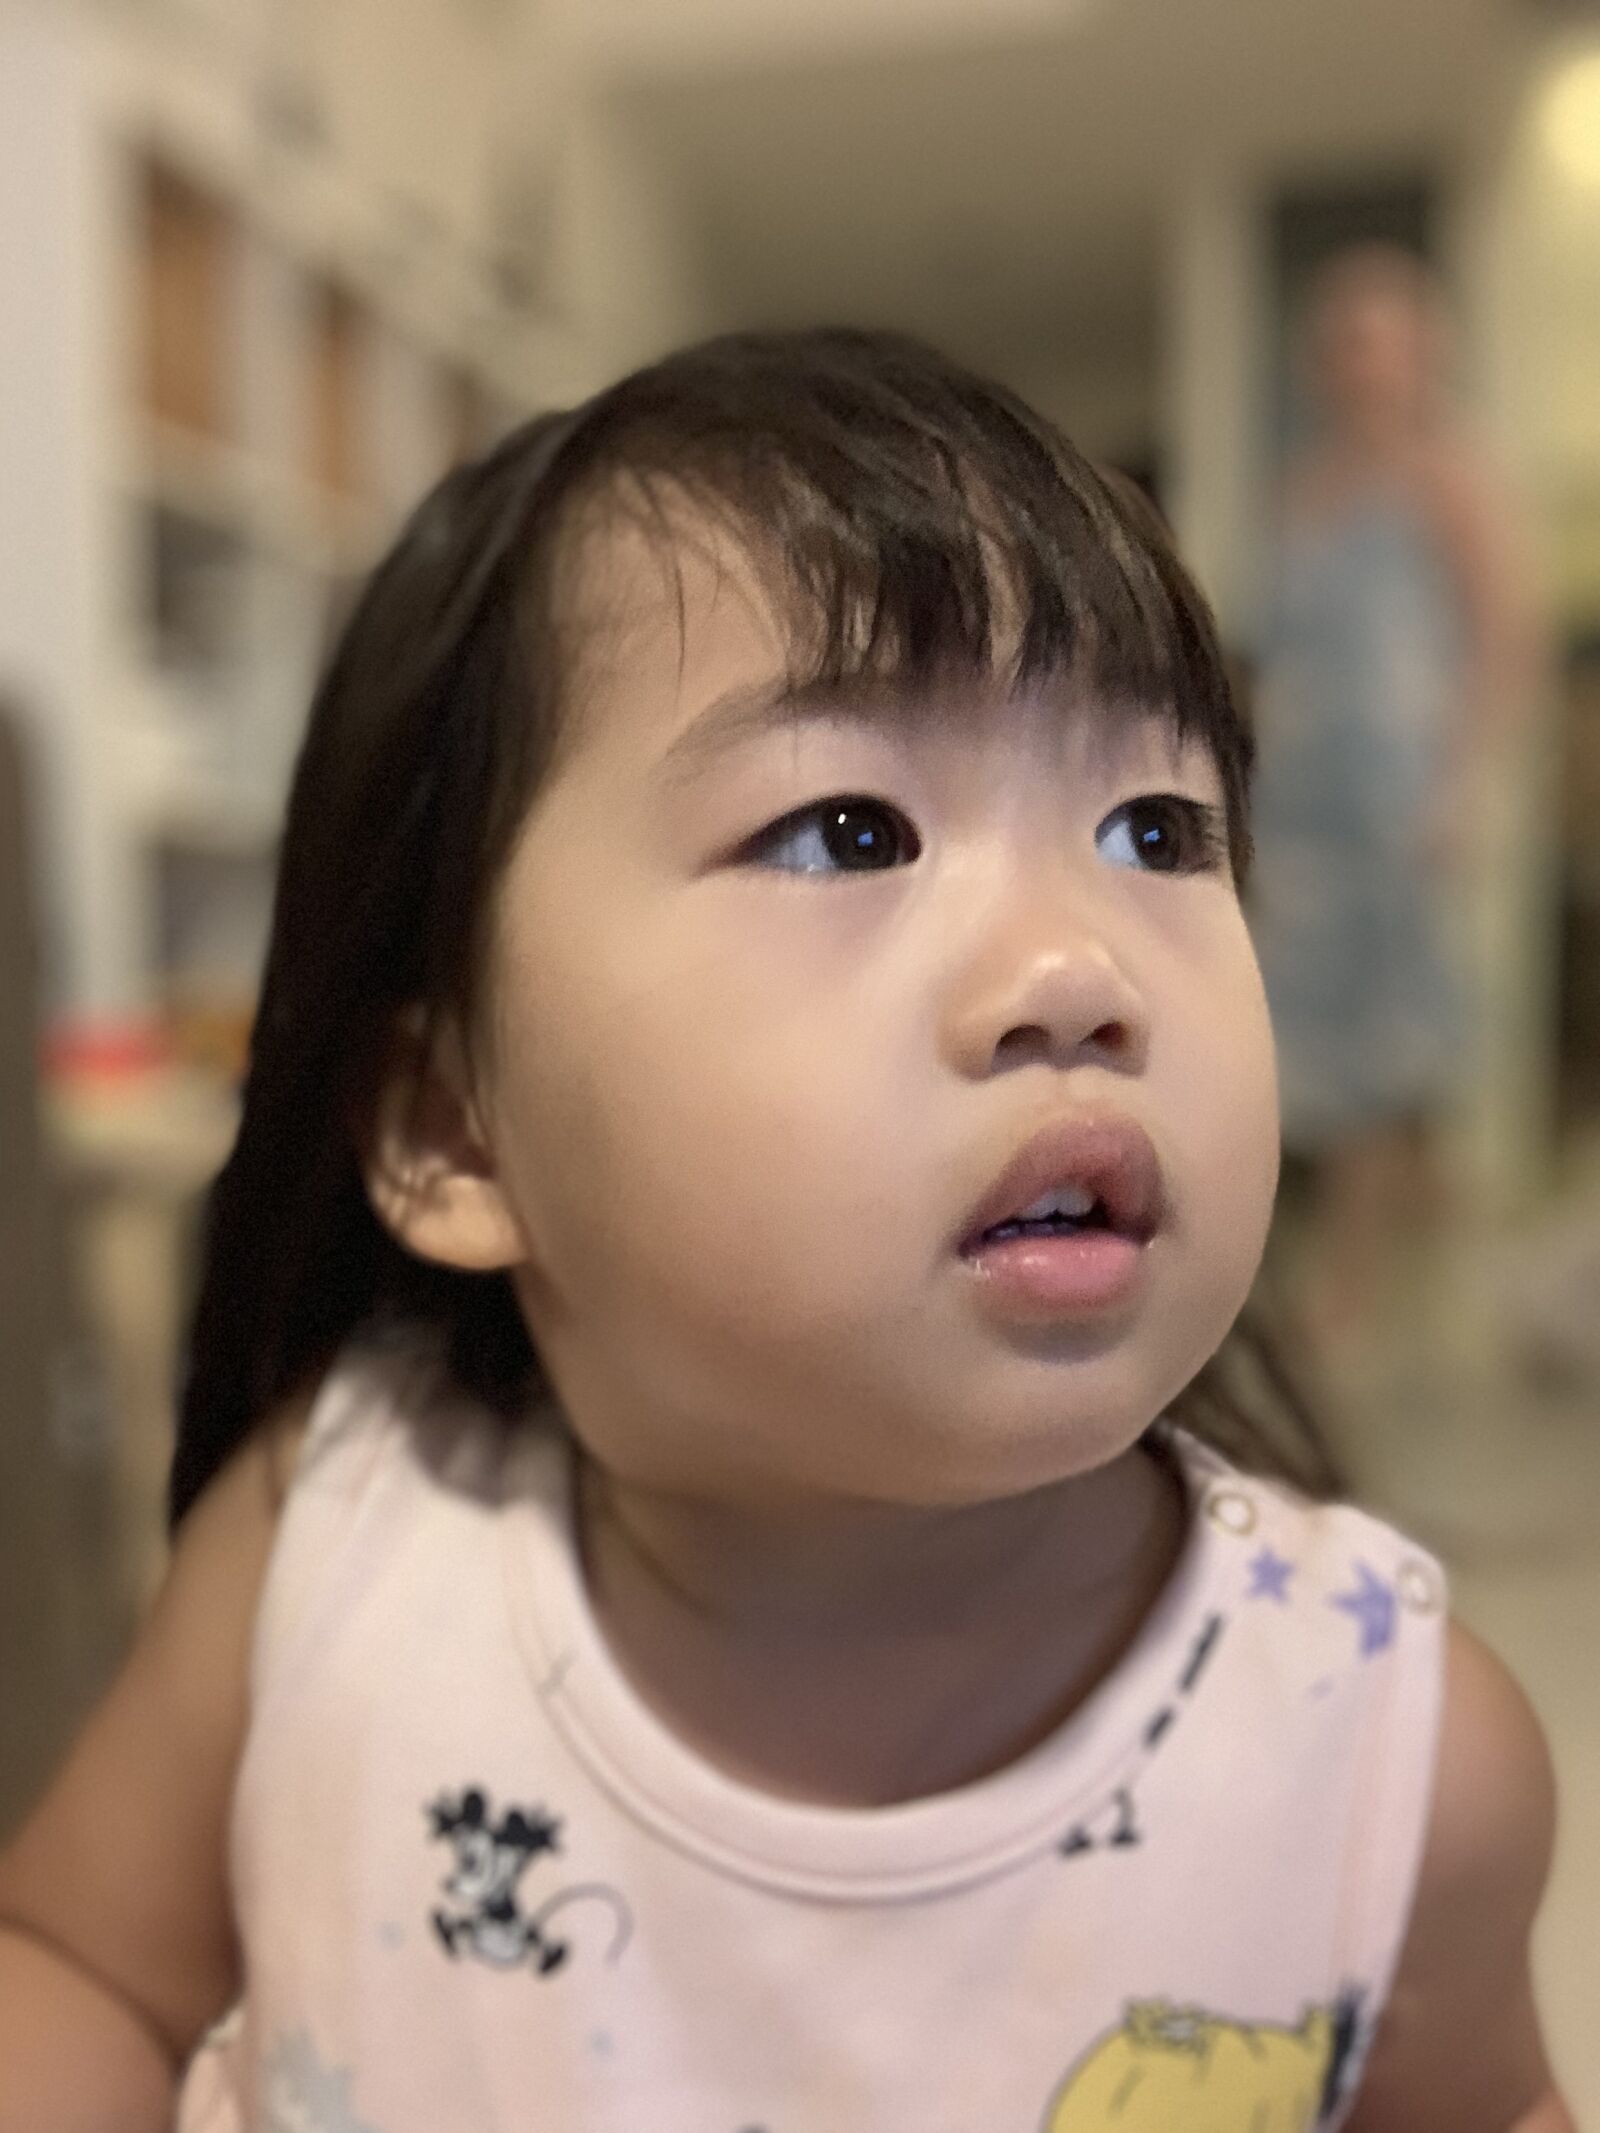 Apple iPhone XR + iPhone XR front TrueDepth camera 2.87mm f/2.2 sample photo. Asian, toddler, girl photography